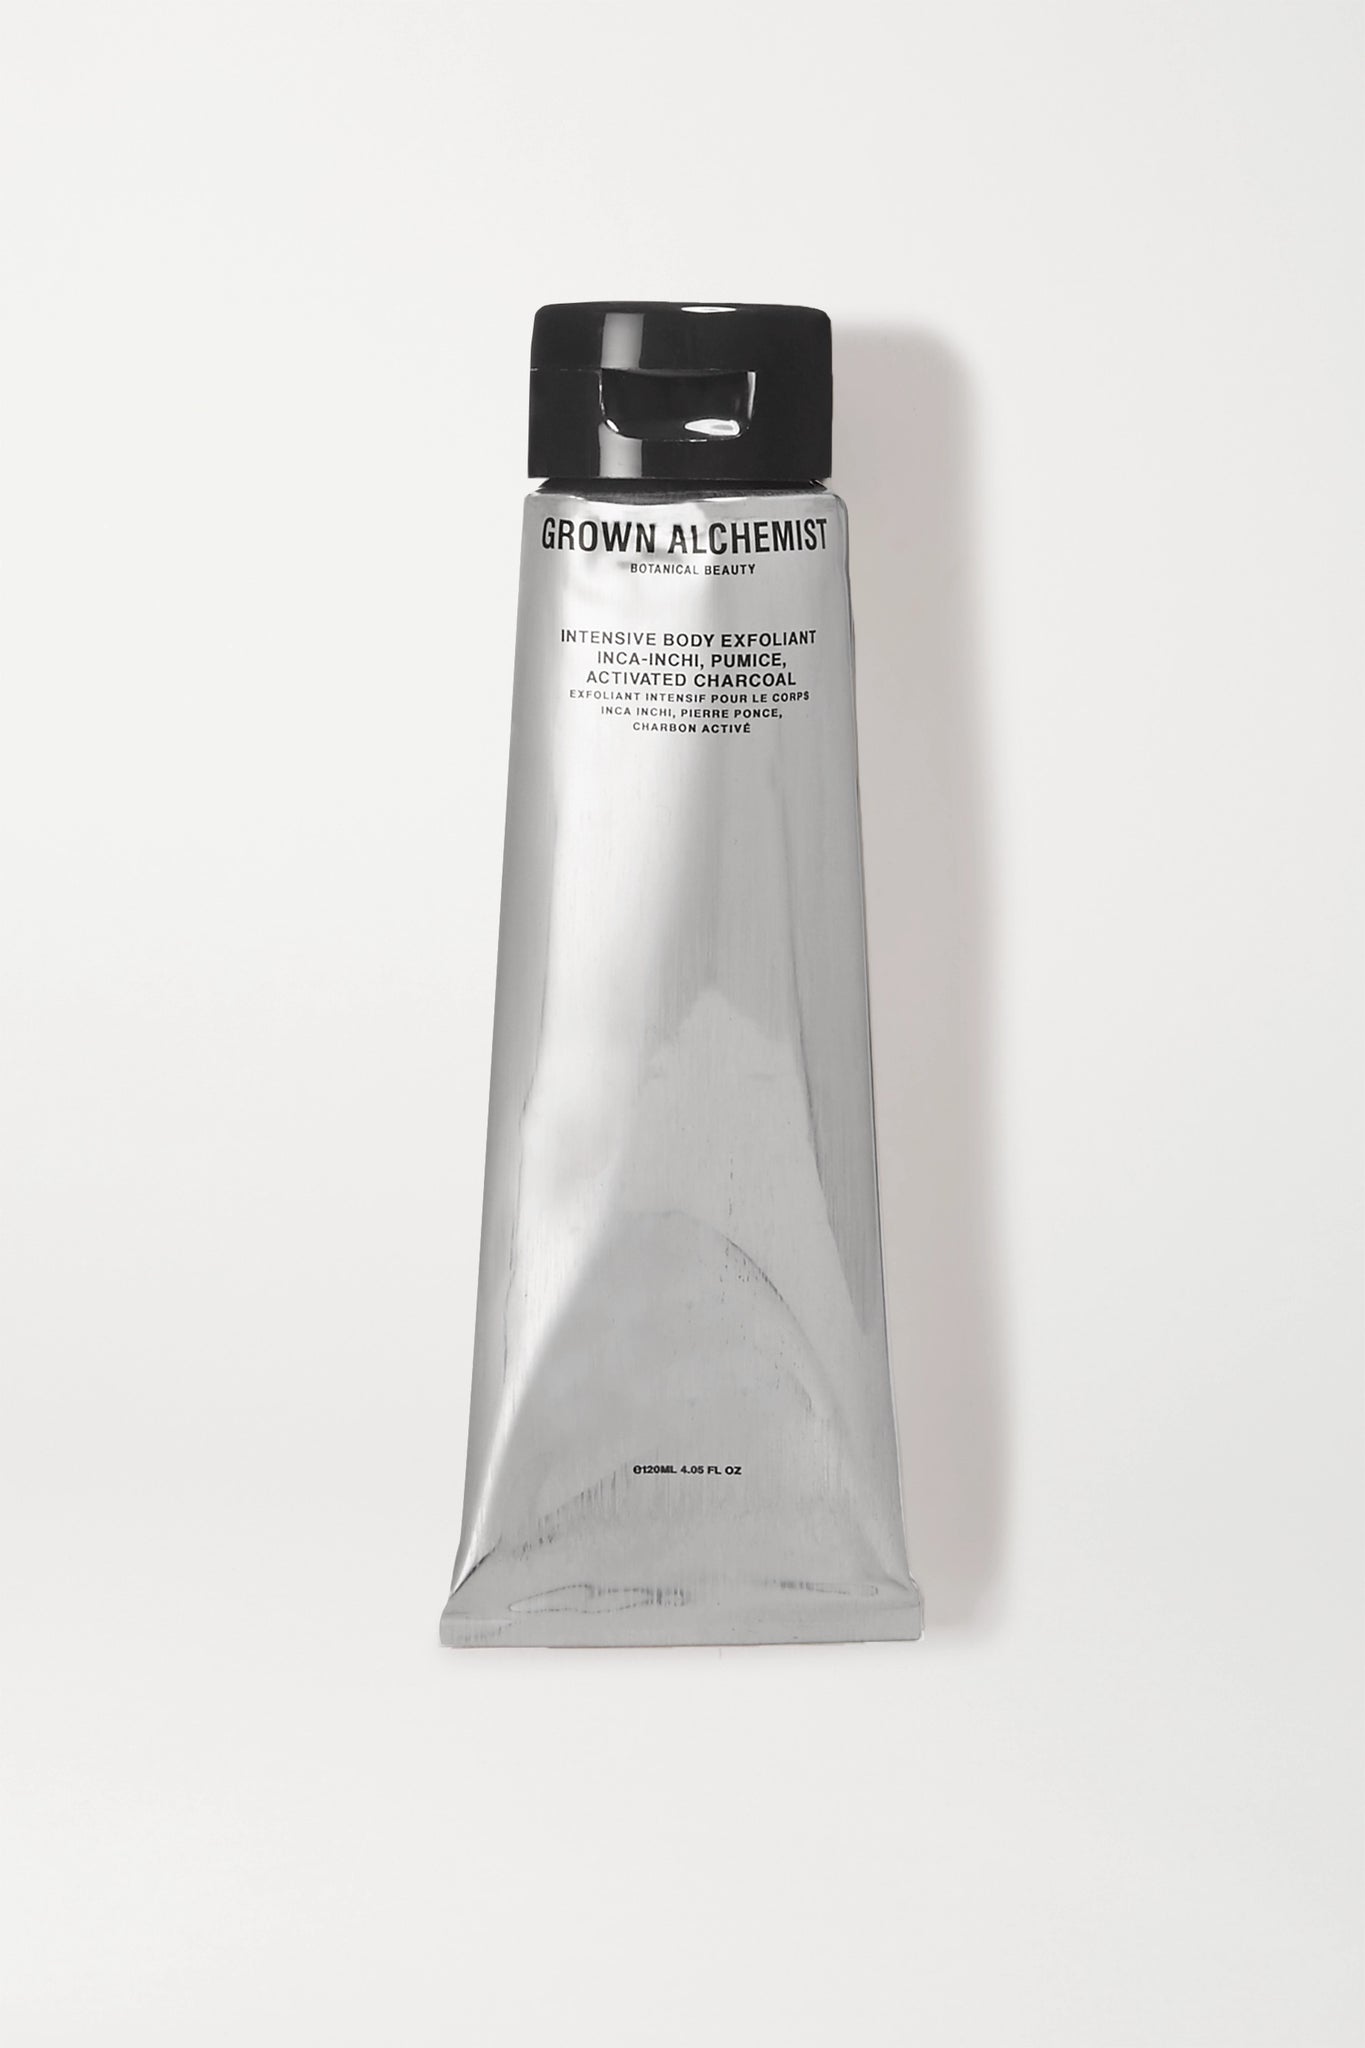 Grown Alchemist Intensive Body Exfoliant Inca-inchi Pumice Activated Charcoal